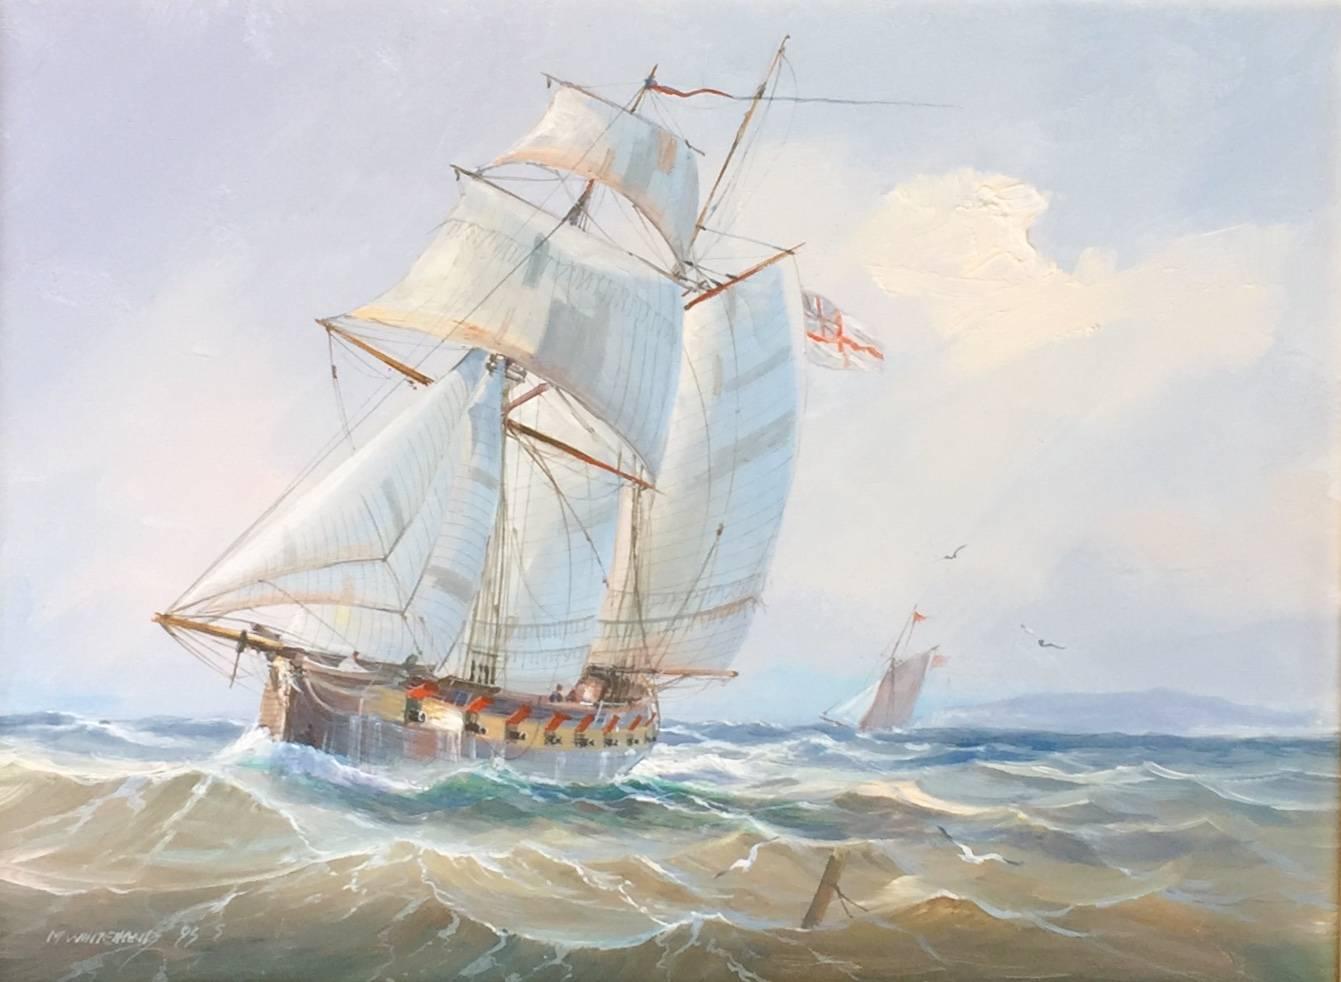 Signed and dated 93 lower left. Oil on canvas.

Michael J. Whitehand
b. 1941, British
Born in the East coastal town of Bridlington in Yorkshire, England, and largely self-taught, Michael Whitehand is one of England’s top maritime artists. He has